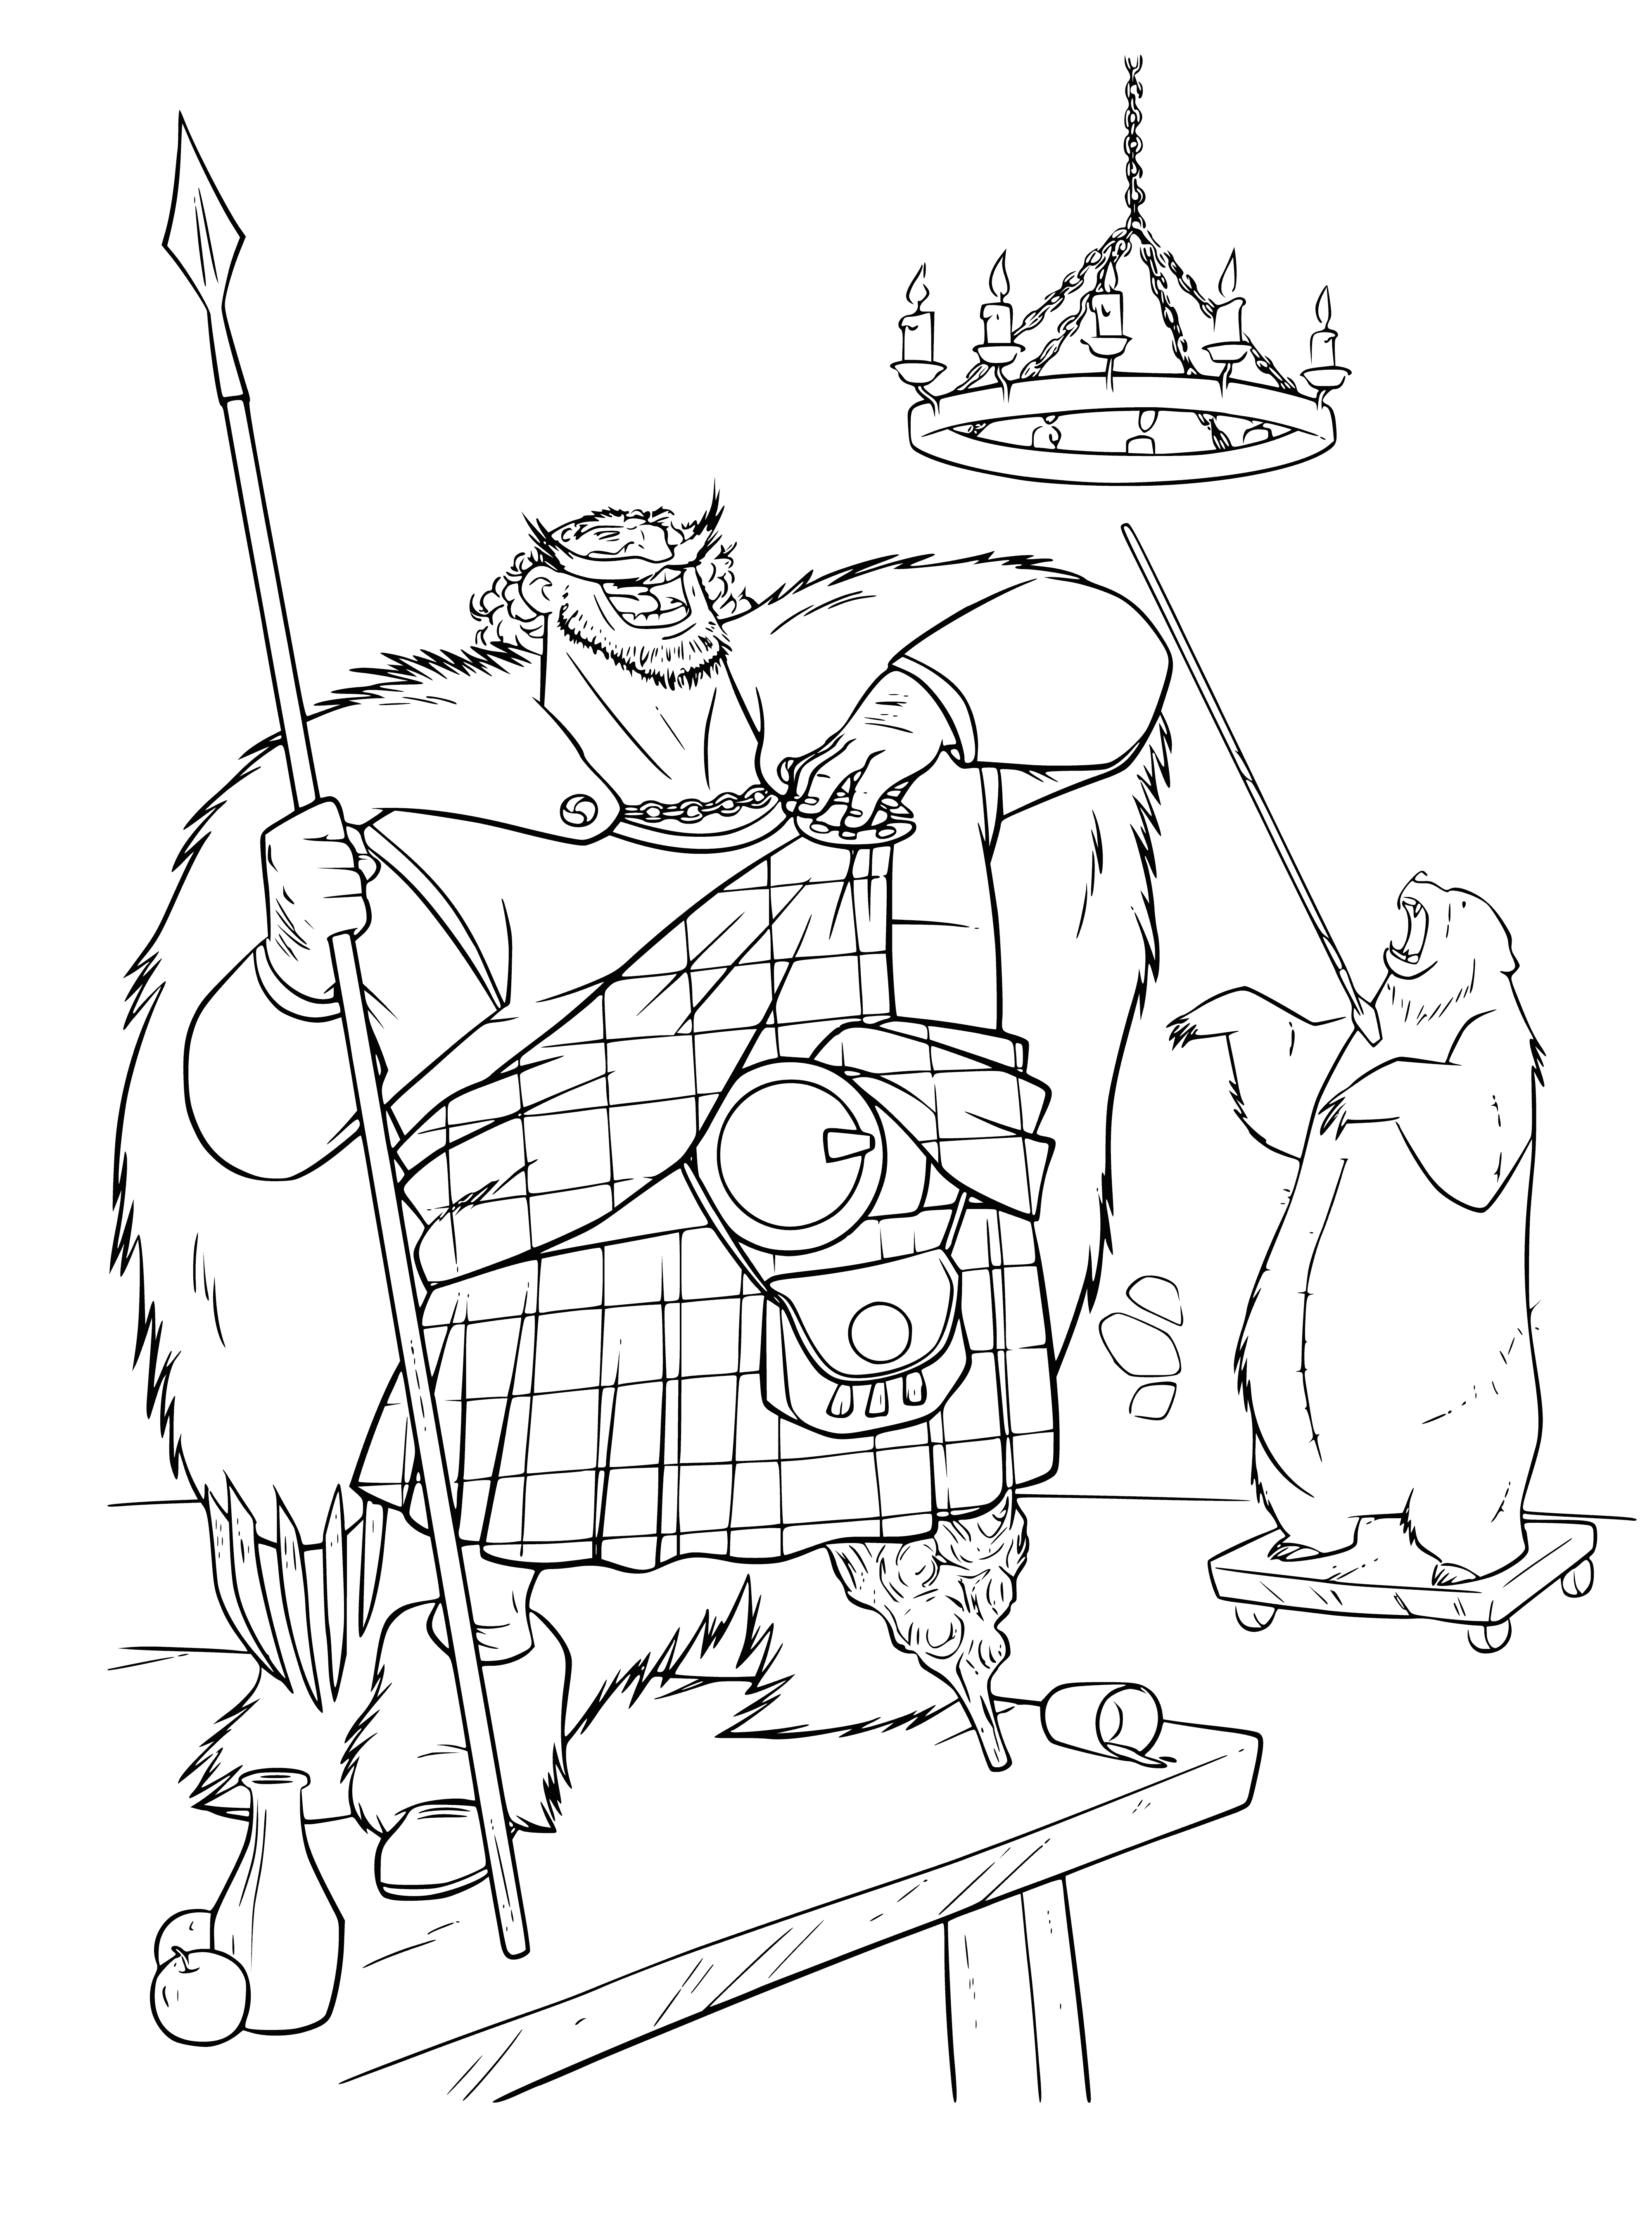 coloring page: King Fergus loves to hunt and is brave, strong and a beloved king.